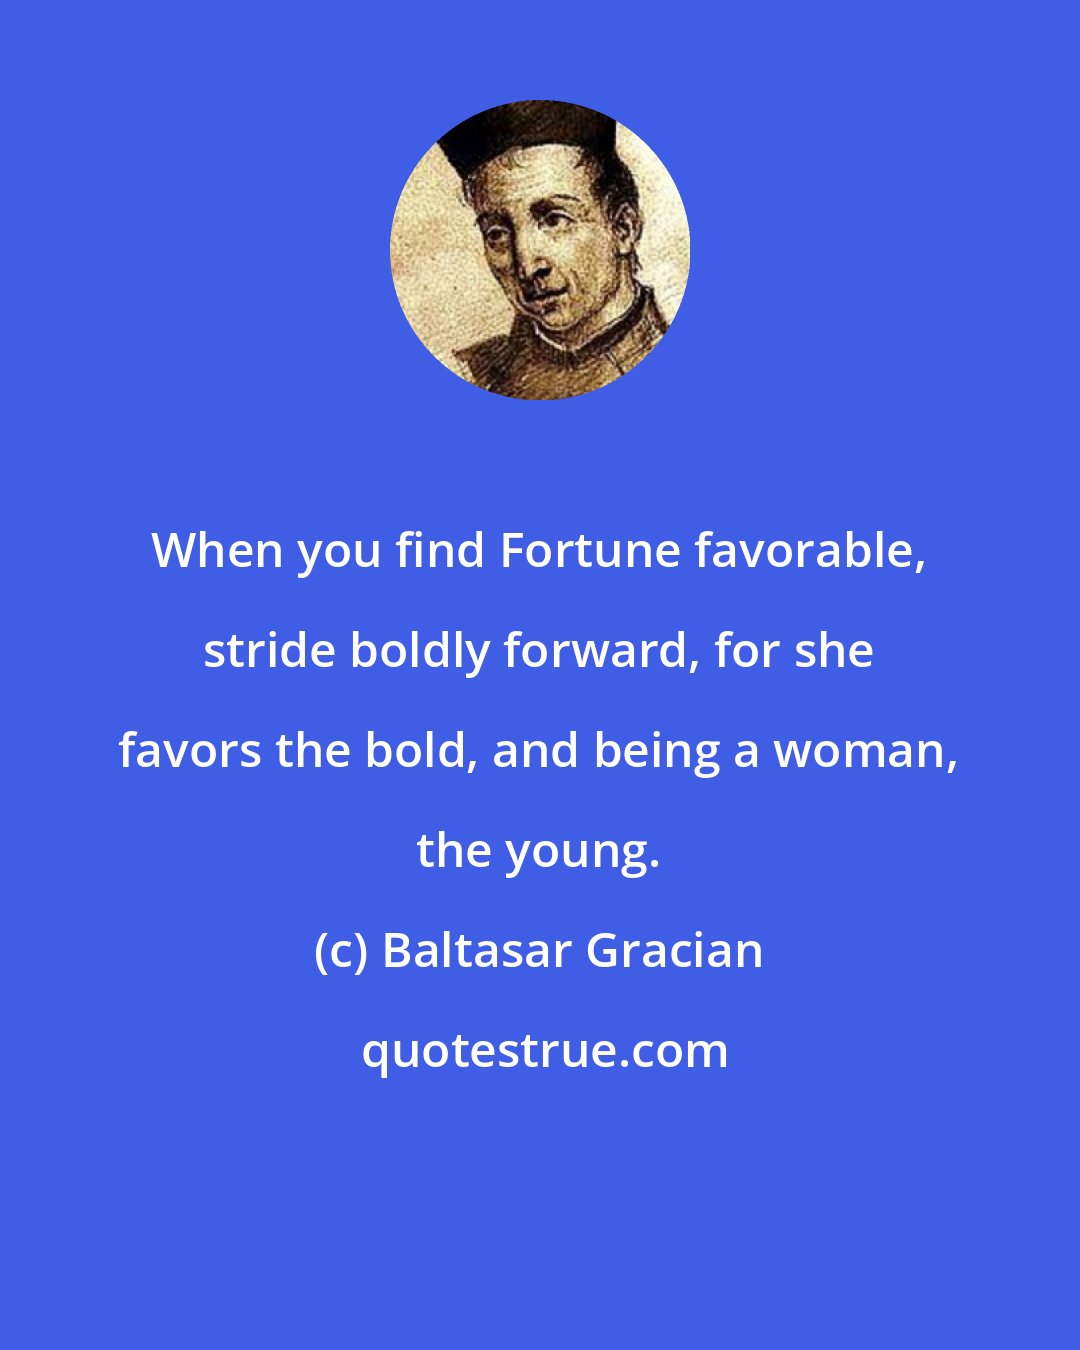 Baltasar Gracian: When you find Fortune favorable, stride boldly forward, for she favors the bold, and being a woman, the young.